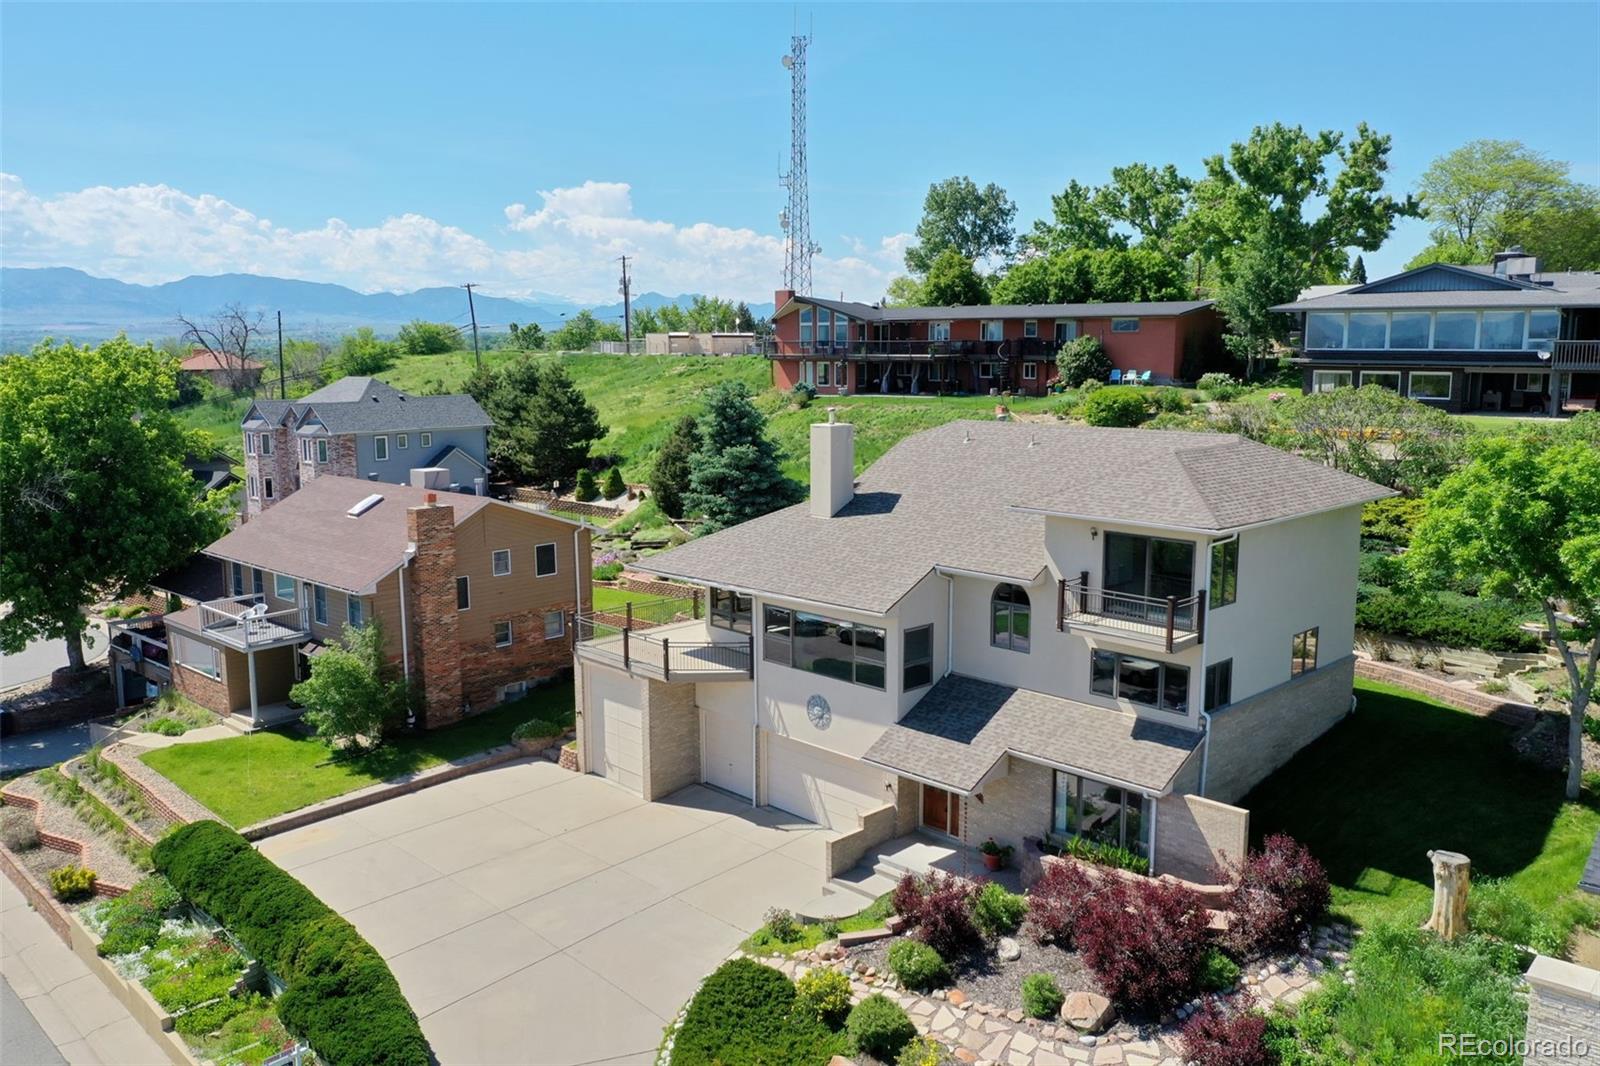 6846 Dudley, Arvada, CO